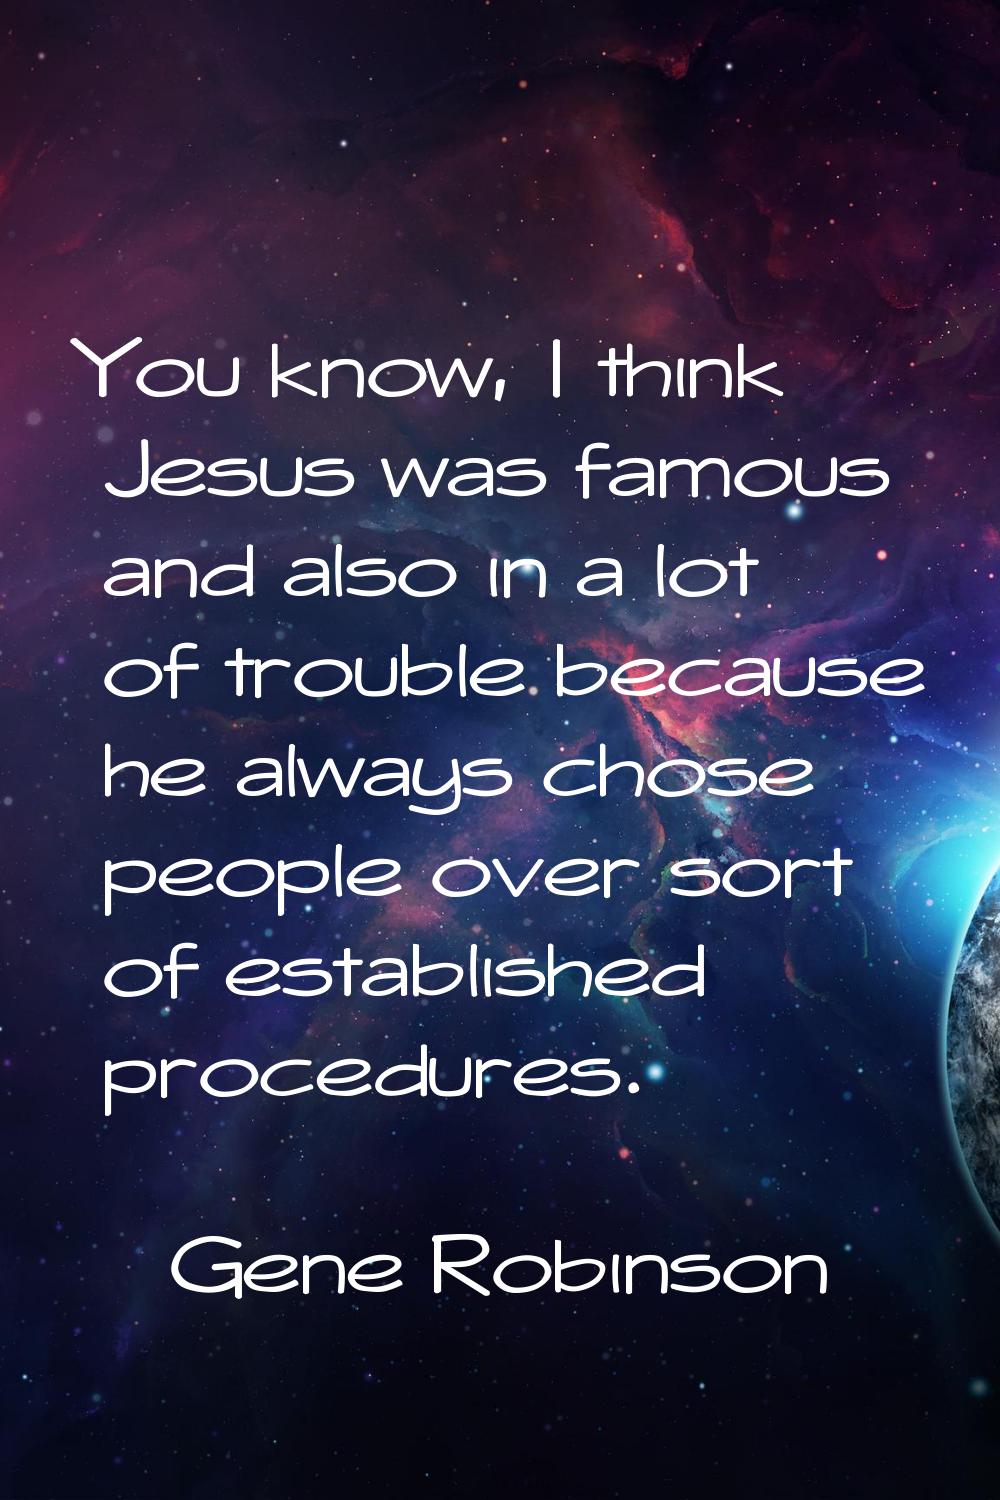 You know, I think Jesus was famous and also in a lot of trouble because he always chose people over